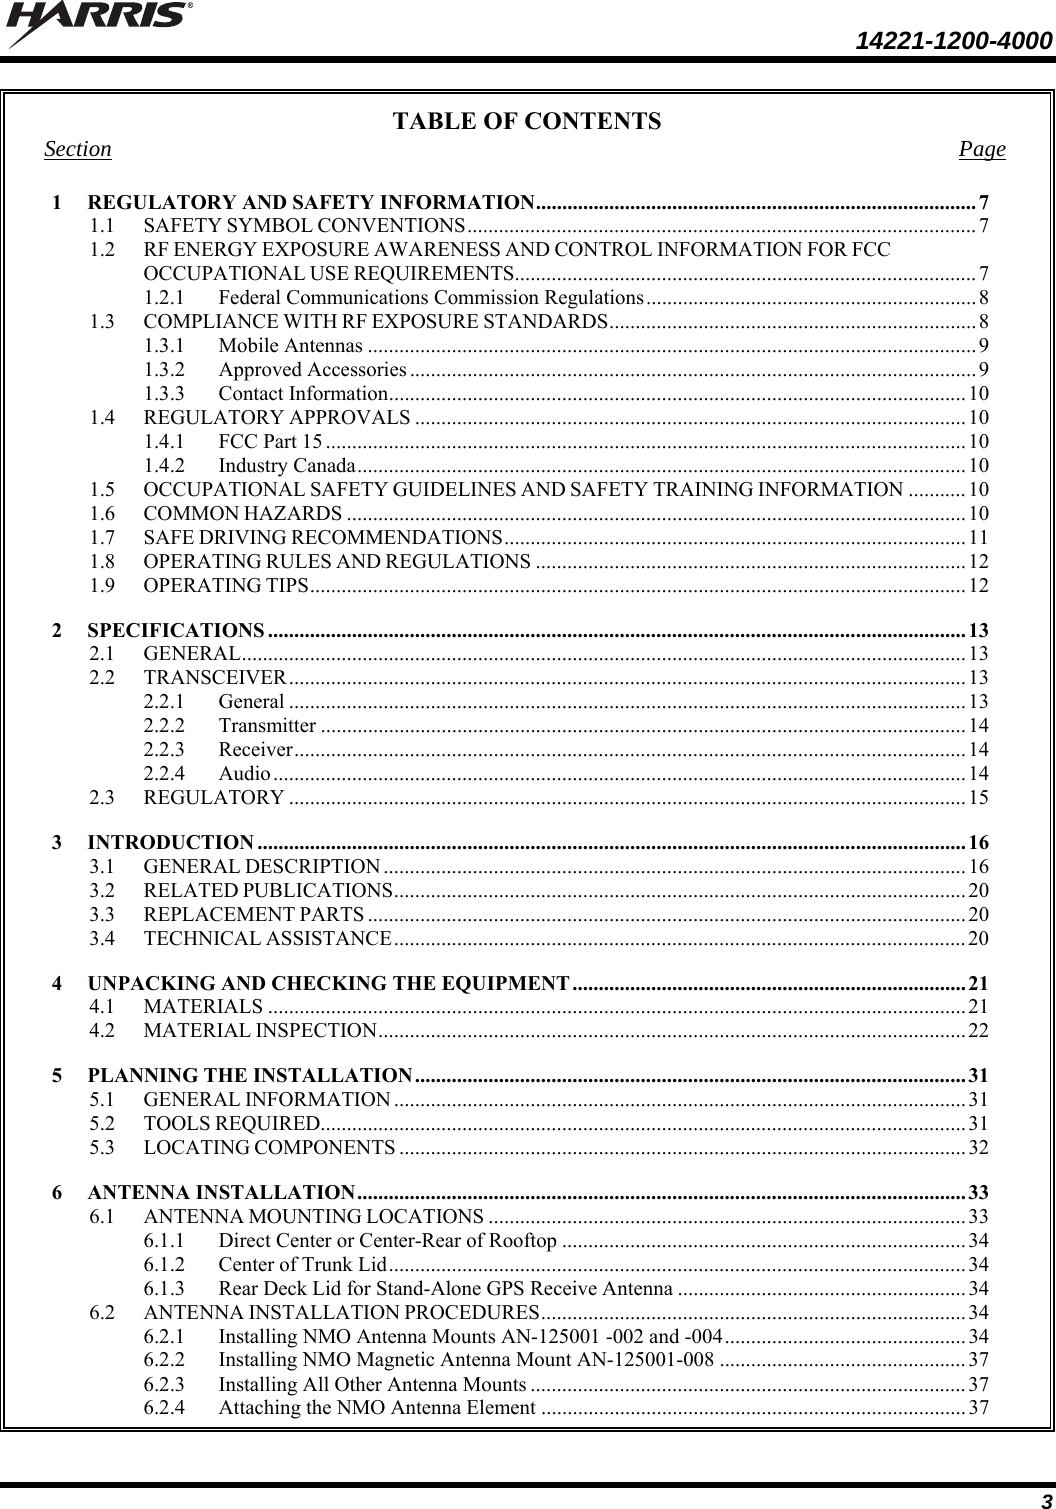  14221-1200-4000  3 TABLE OF CONTENTS Section Page 1REGULATORY AND SAFETY INFORMATION .................................................................................... 71.1SAFETY SYMBOL CONVENTIONS ................................................................................................. 71.2RF ENERGY EXPOSURE AWARENESS AND CONTROL INFORMATION FOR FCC OCCUPATIONAL USE REQUIREMENTS ........................................................................................ 71.2.1Federal Communications Commission Regulations ............................................................... 81.3COMPLIANCE WITH RF EXPOSURE STANDARDS ...................................................................... 81.3.1Mobile Antennas .................................................................................................................... 91.3.2Approved Accessories ............................................................................................................ 91.3.3Contact Information .............................................................................................................. 101.4REGULATORY APPROVALS ......................................................................................................... 101.4.1FCC Part 15 .......................................................................................................................... 101.4.2Industry Canada .................................................................................................................... 101.5OCCUPATIONAL SAFETY GUIDELINES AND SAFETY TRAINING INFORMATION ........... 101.6COMMON HAZARDS ...................................................................................................................... 101.7SAFE DRIVING RECOMMENDATIONS ........................................................................................  111.8OPERATING RULES AND REGULATIONS .................................................................................. 121.9OPERATING TIPS ............................................................................................................................. 122SPECIFICATIONS ..................................................................................................................................... 132.1GENERAL .......................................................................................................................................... 132.2TRANSCEIVER ................................................................................................................................. 132.2.1General ................................................................................................................................. 132.2.2Transmitter ........................................................................................................................... 142.2.3Receiver ................................................................................................................................ 142.2.4Audio .................................................................................................................................... 142.3REGULATORY ................................................................................................................................. 153INTRODUCTION ....................................................................................................................................... 163.1GENERAL DESCRIPTION ............................................................................................................... 163.2RELATED PUBLICATIONS ............................................................................................................. 203.3REPLACEMENT PARTS .................................................................................................................. 203.4TECHNICAL ASSISTANCE ............................................................................................................. 204UNPACKING AND CHECKING THE EQUIPMENT ........................................................................... 214.1MATERIALS ..................................................................................................................................... 214.2MATERIAL INSPECTION ................................................................................................................  225PLANNING THE INSTALLATION ......................................................................................................... 315.1GENERAL INFORMATION ............................................................................................................. 315.2TOOLS REQUIRED........................................................................................................................... 315.3LOCATING COMPONENTS ............................................................................................................ 326ANTENNA INSTALLATION .................................................................................................................... 336.1ANTENNA MOUNTING LOCATIONS ........................................................................................... 336.1.1Direct Center or Center-Rear of Rooftop ............................................................................. 346.1.2Center of Trunk Lid .............................................................................................................. 346.1.3Rear Deck Lid for Stand-Alone GPS Receive Antenna ....................................................... 346.2ANTENNA INSTALLATION PROCEDURES .................................................................................  346.2.1Installing NMO Antenna Mounts AN-125001 -002 and -004 .............................................. 346.2.2Installing NMO Magnetic Antenna Mount AN-125001-008 ............................................... 376.2.3Installing All Other Antenna Mounts ................................................................................... 376.2.4Attaching the NMO Antenna Element ................................................................................. 37